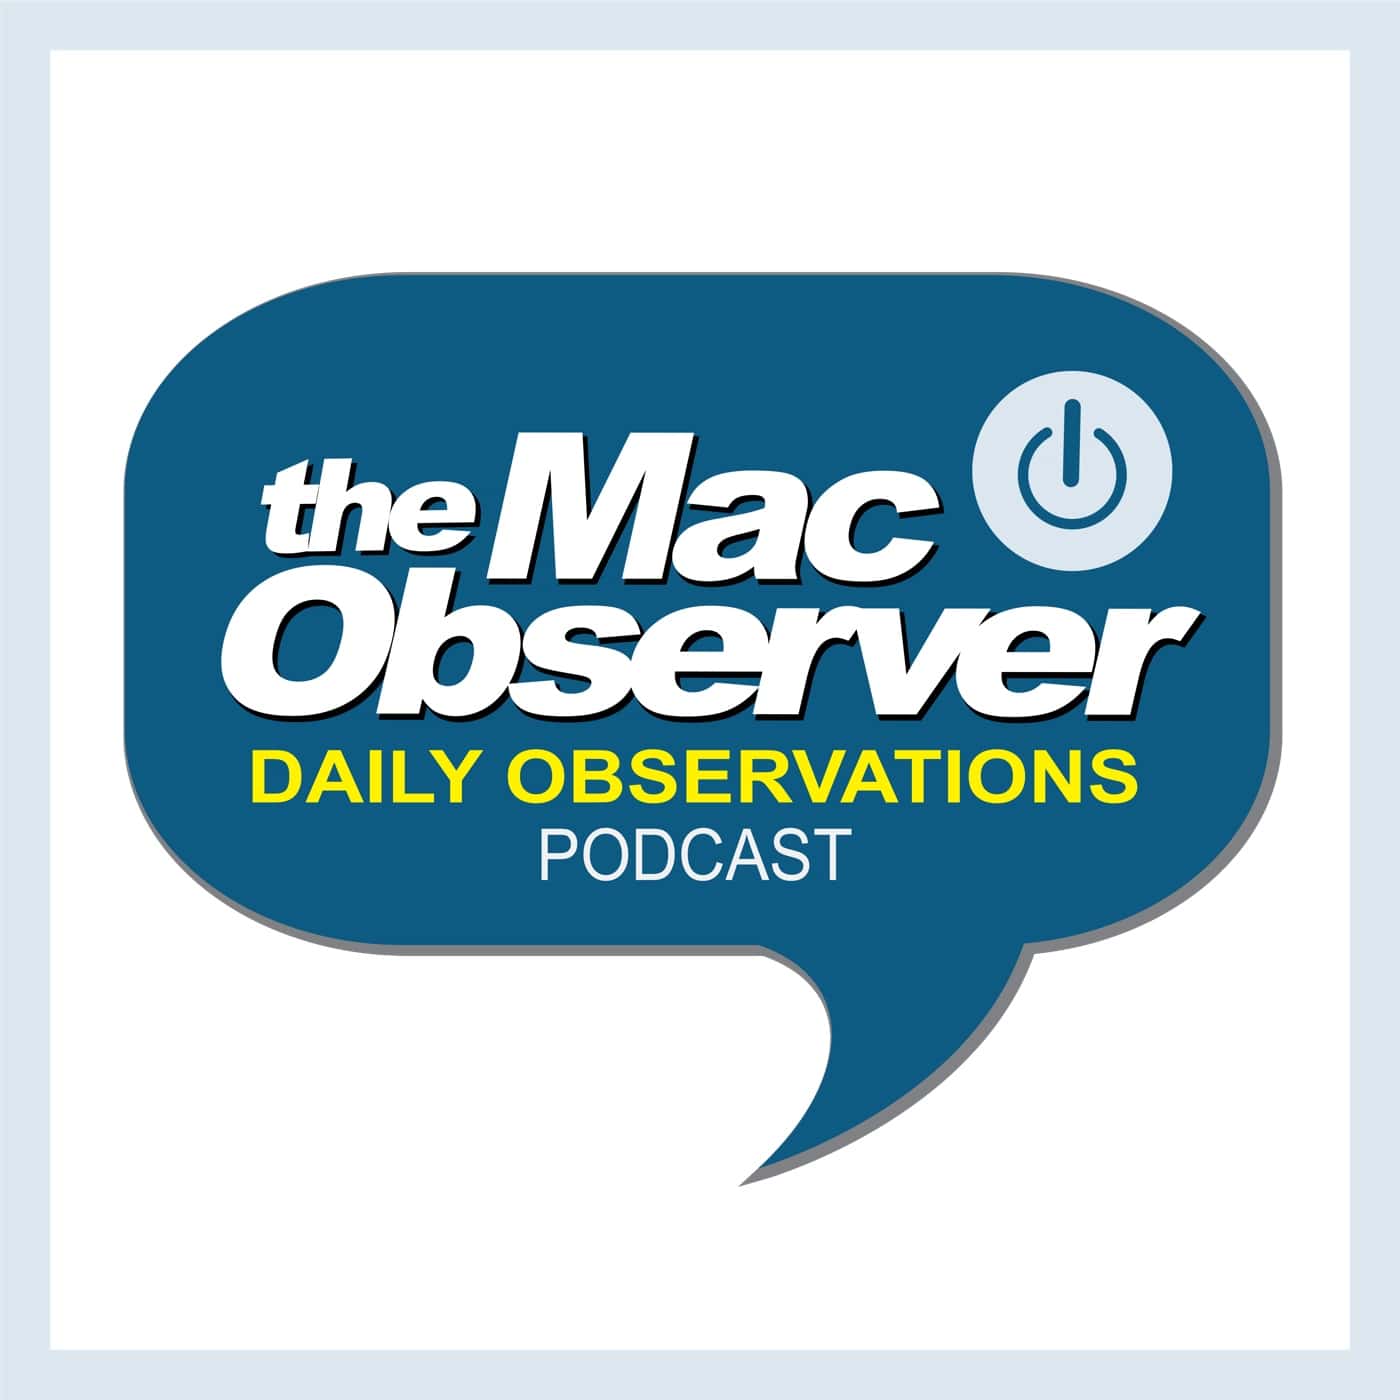 The Mac Observer Daily Observations Podcast